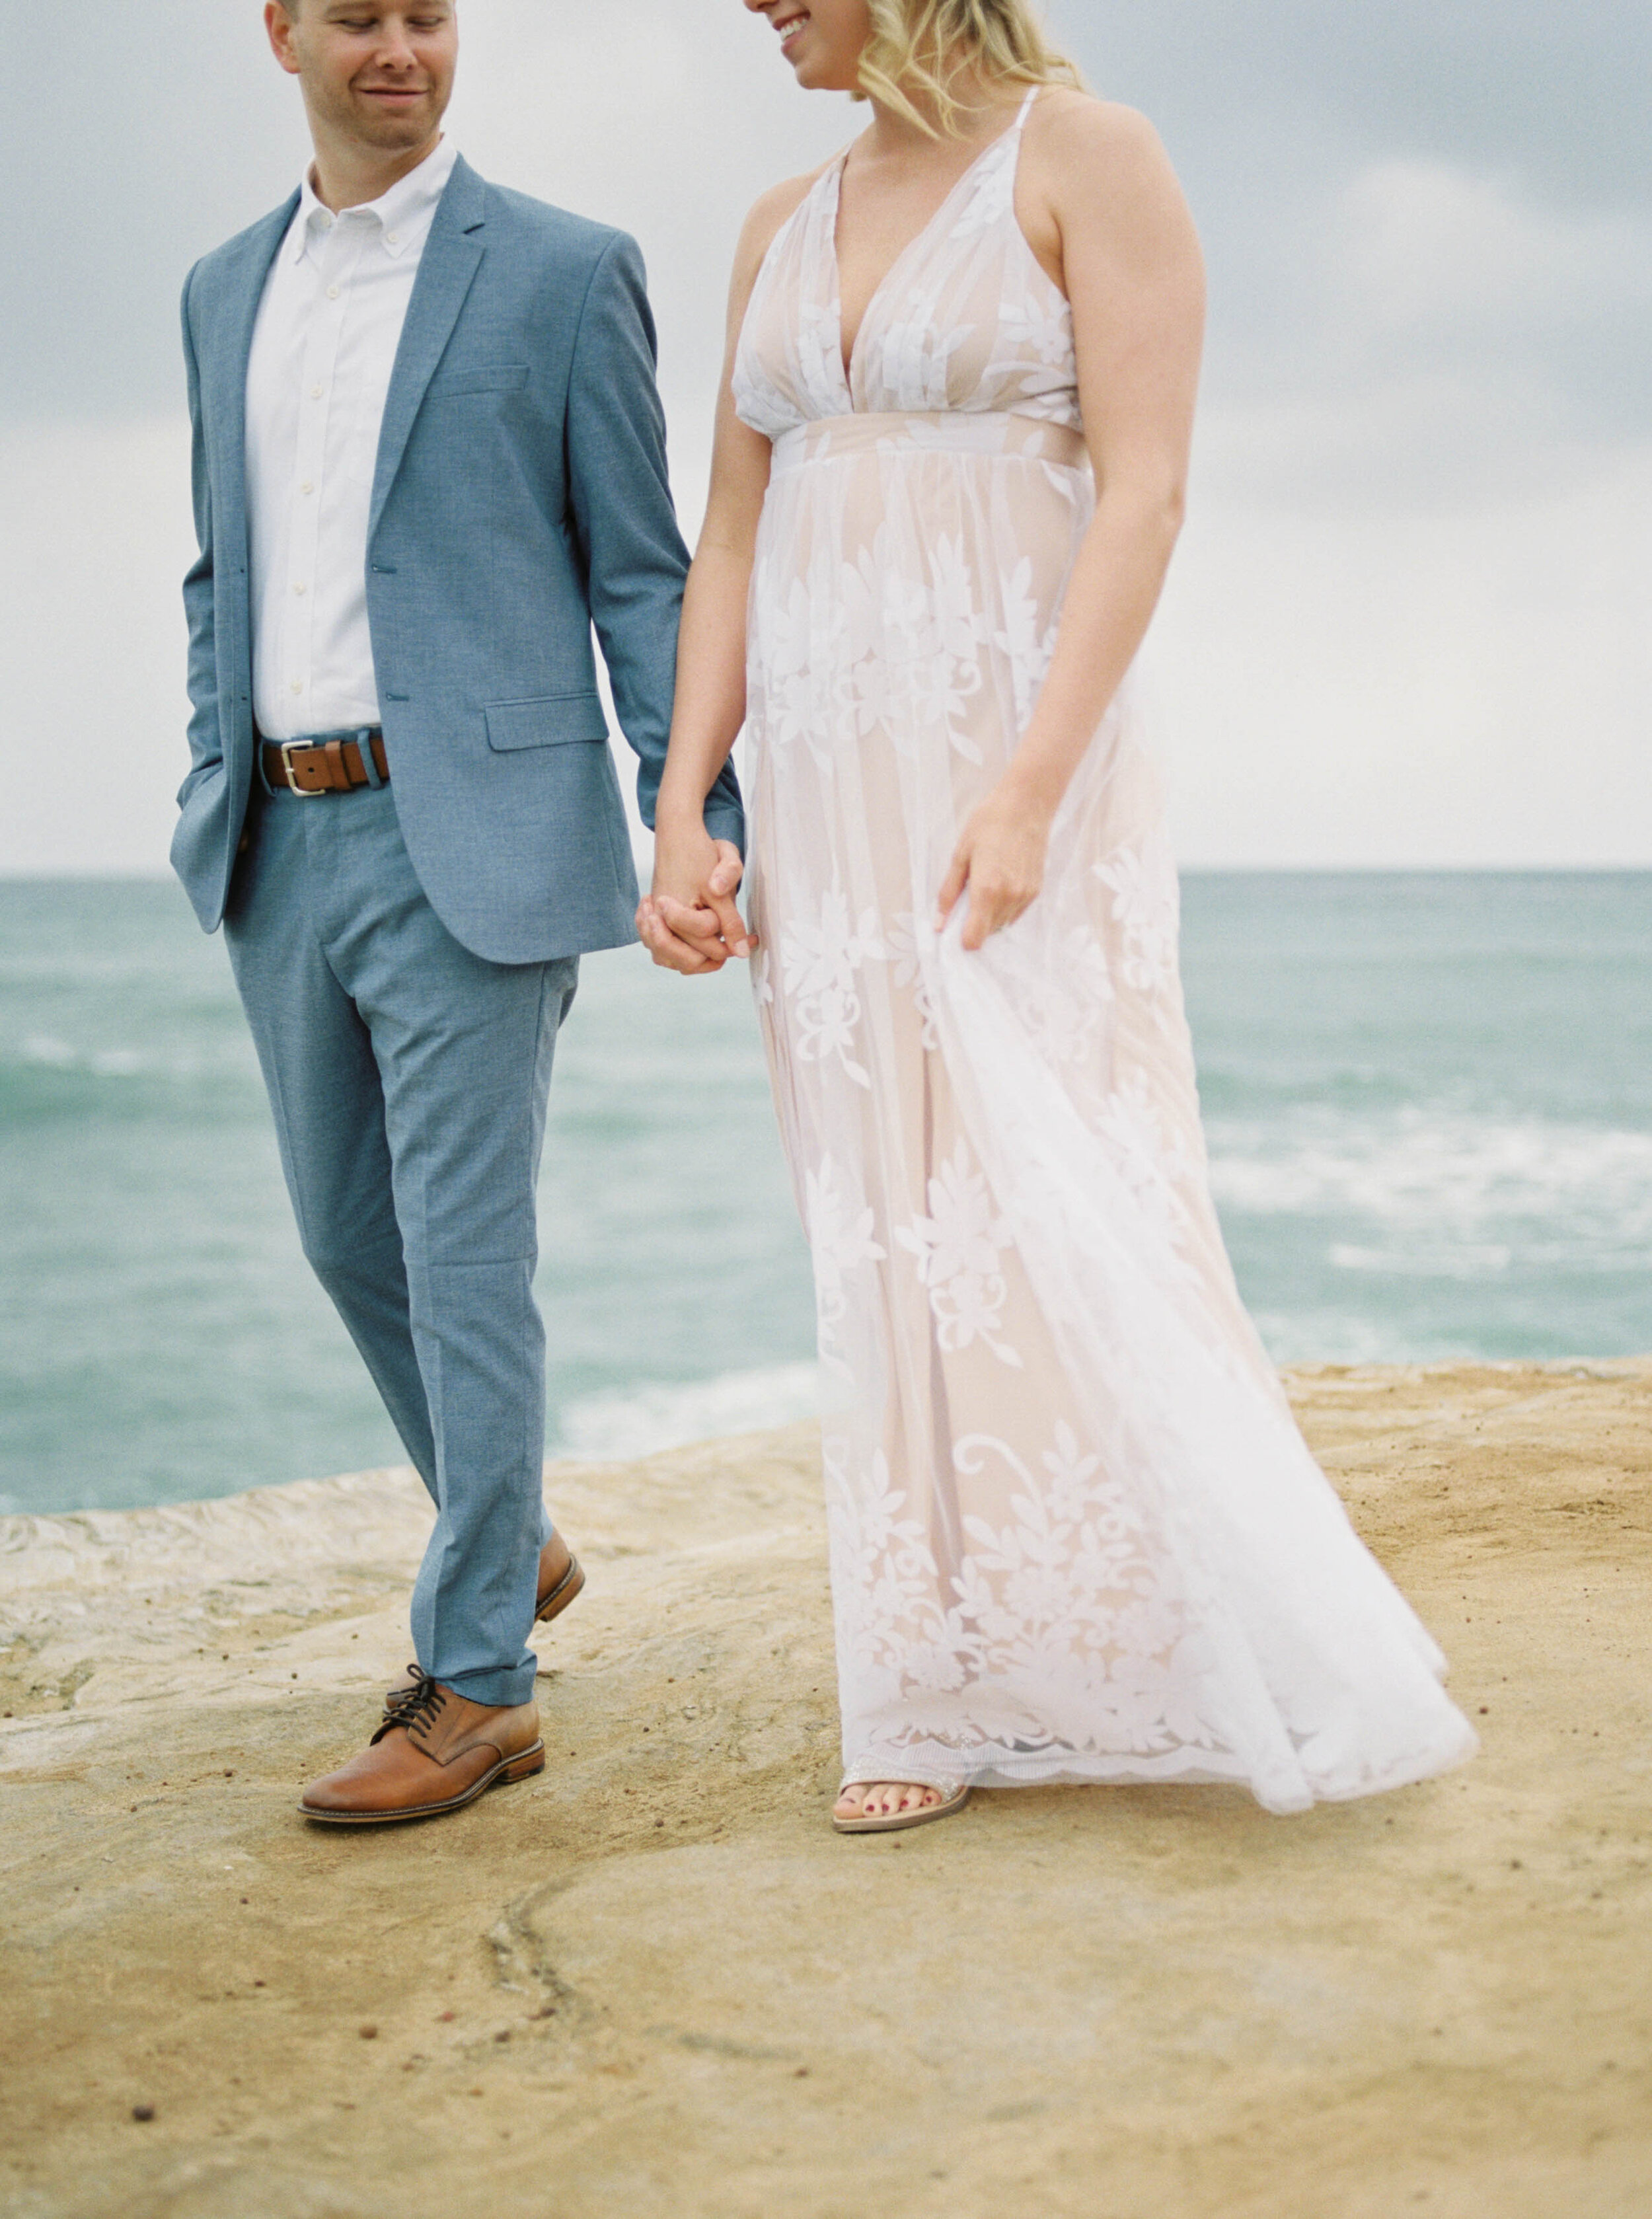 Anniversary wedding session on film at the Sunset Cliffs in San Diego California with stylish white flowy dress and blue suit by the ocean and beach by Liz Andolina Photography